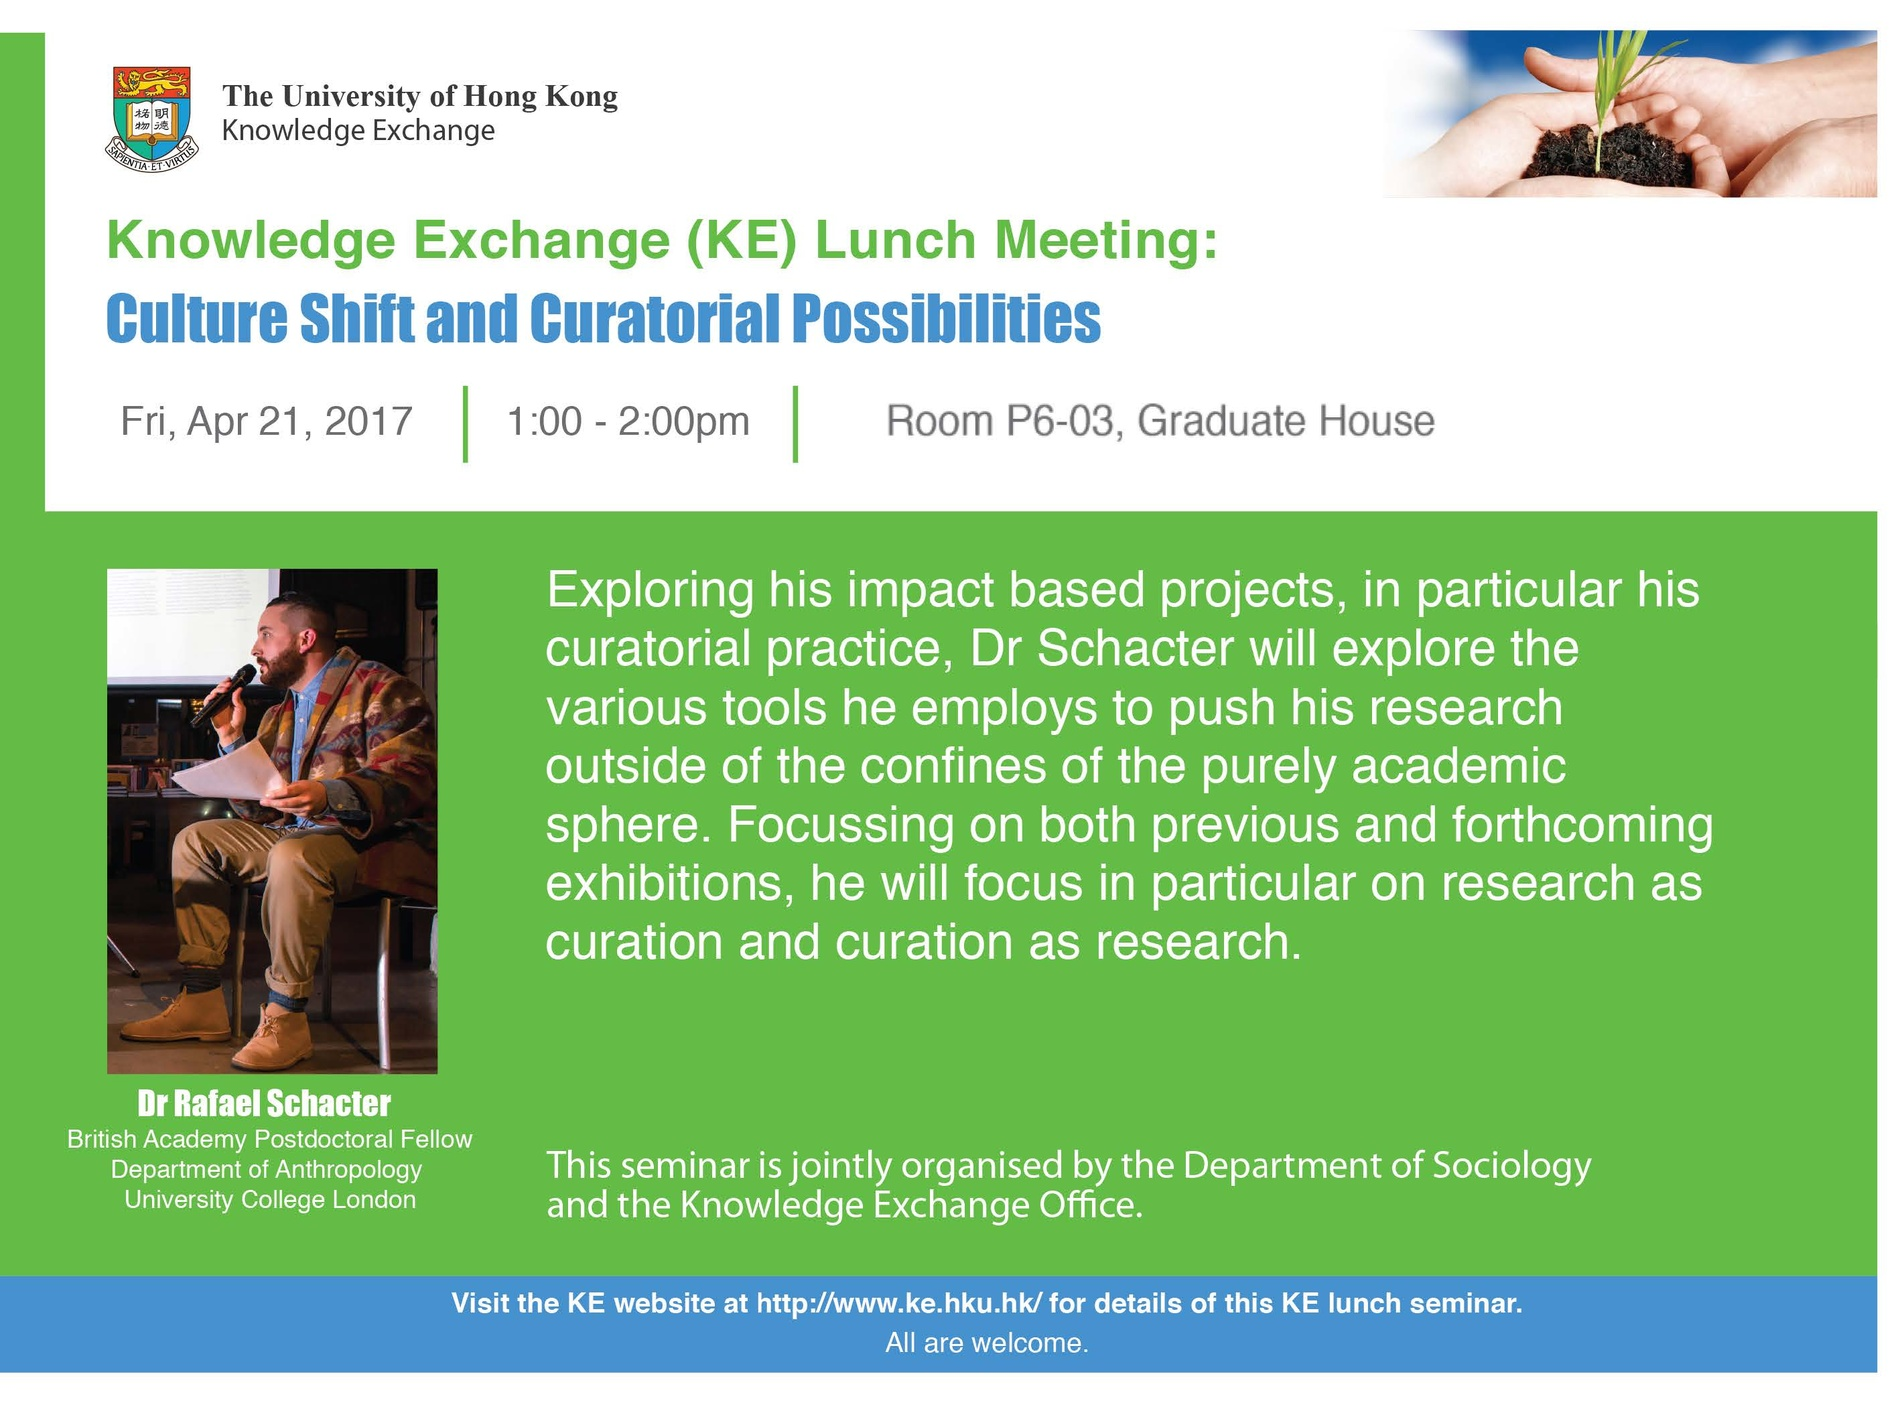 KE Lunch Meeting:  Culture Shift and Curatorial Possibilities